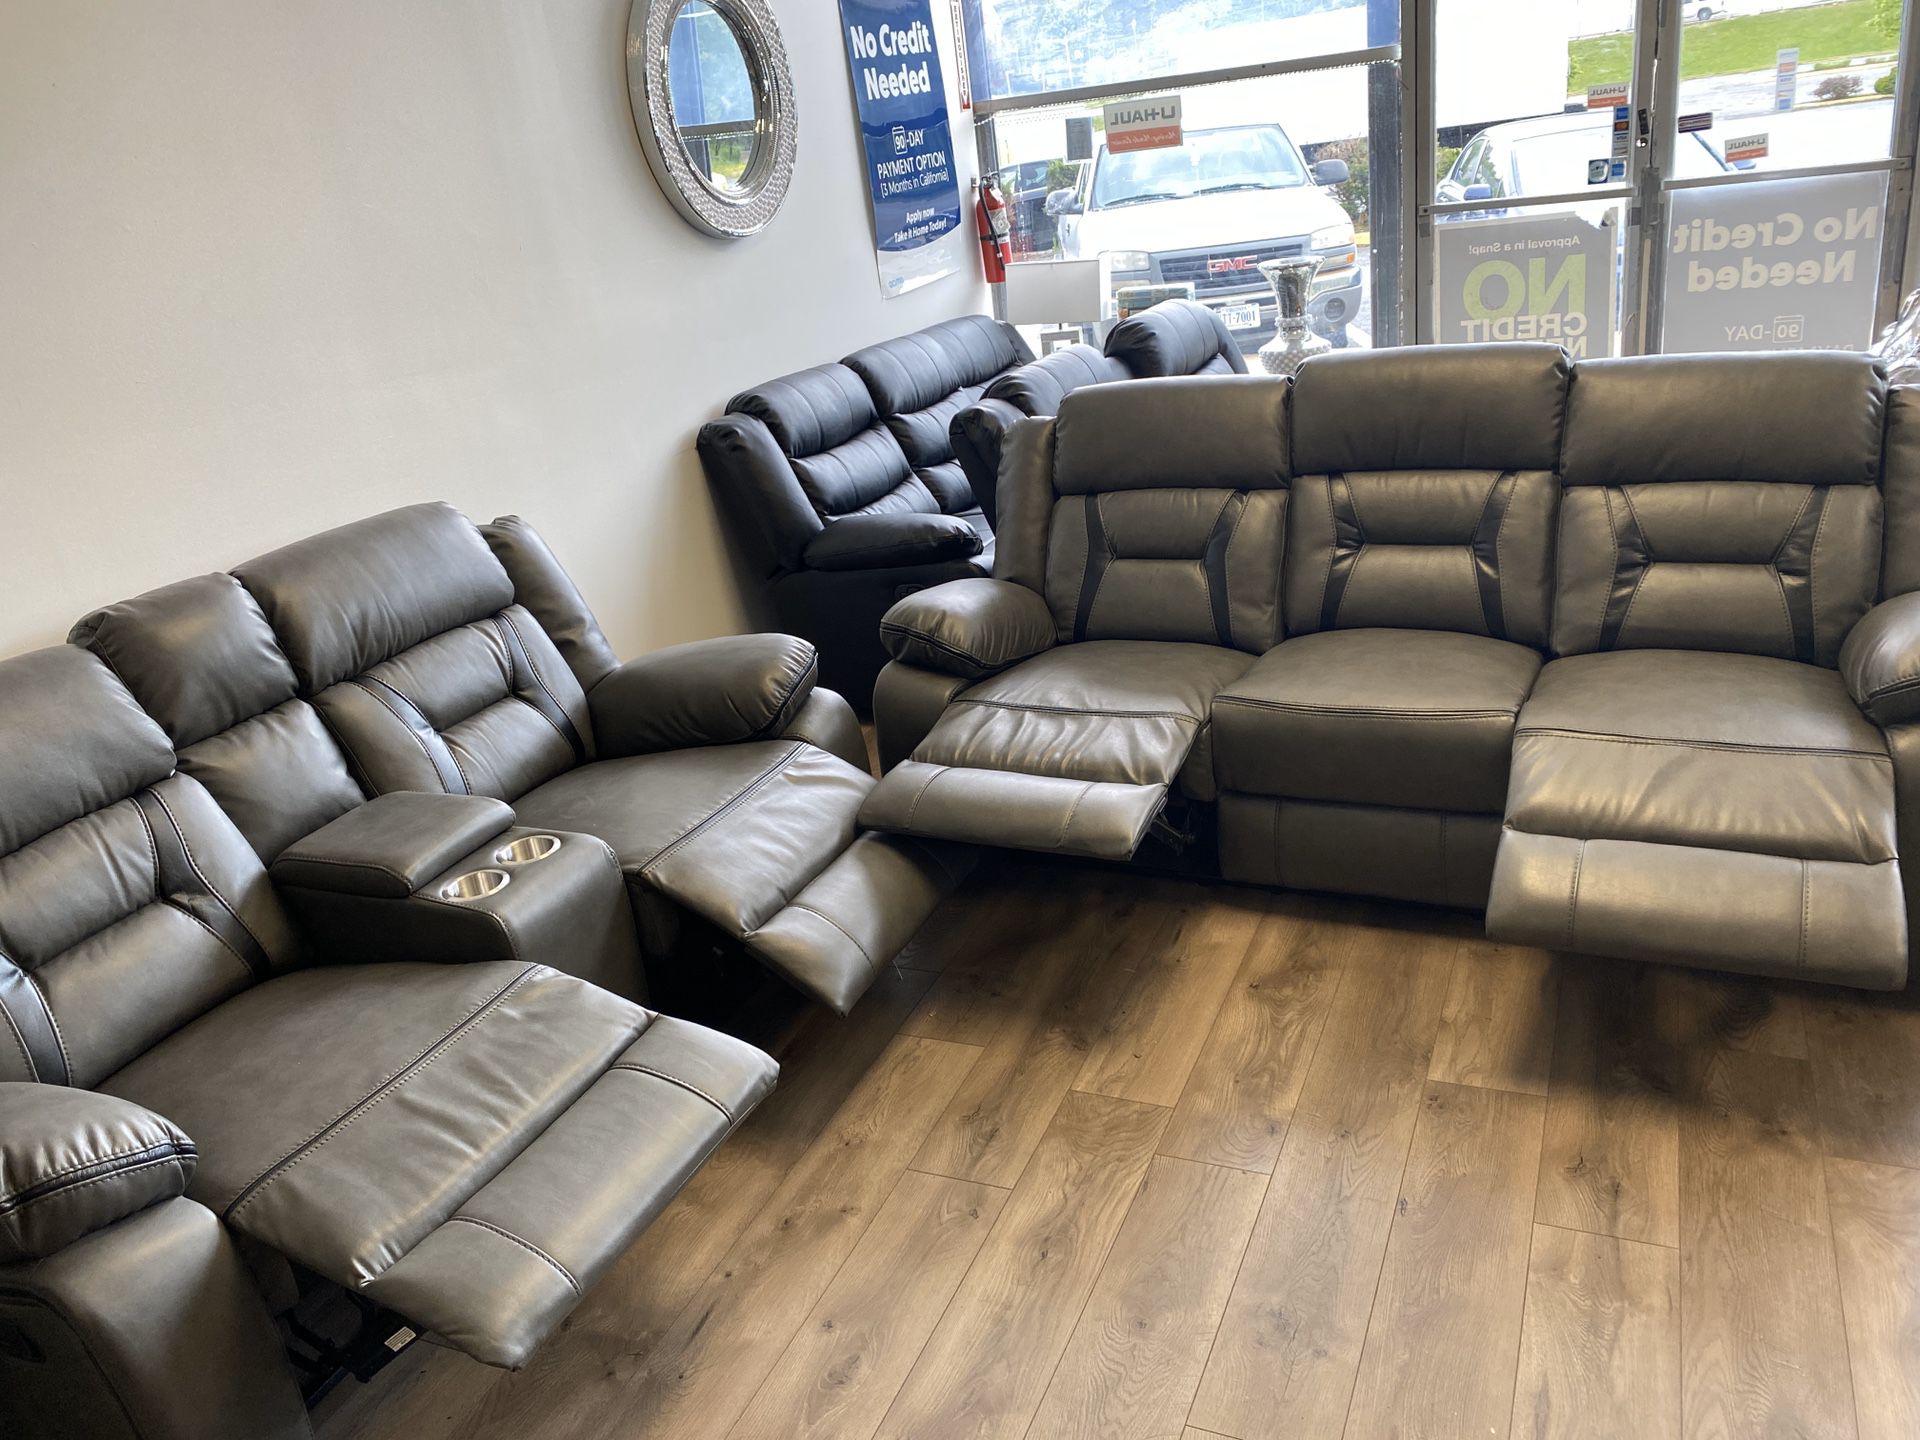 2 pc recliner sofa and loveseat